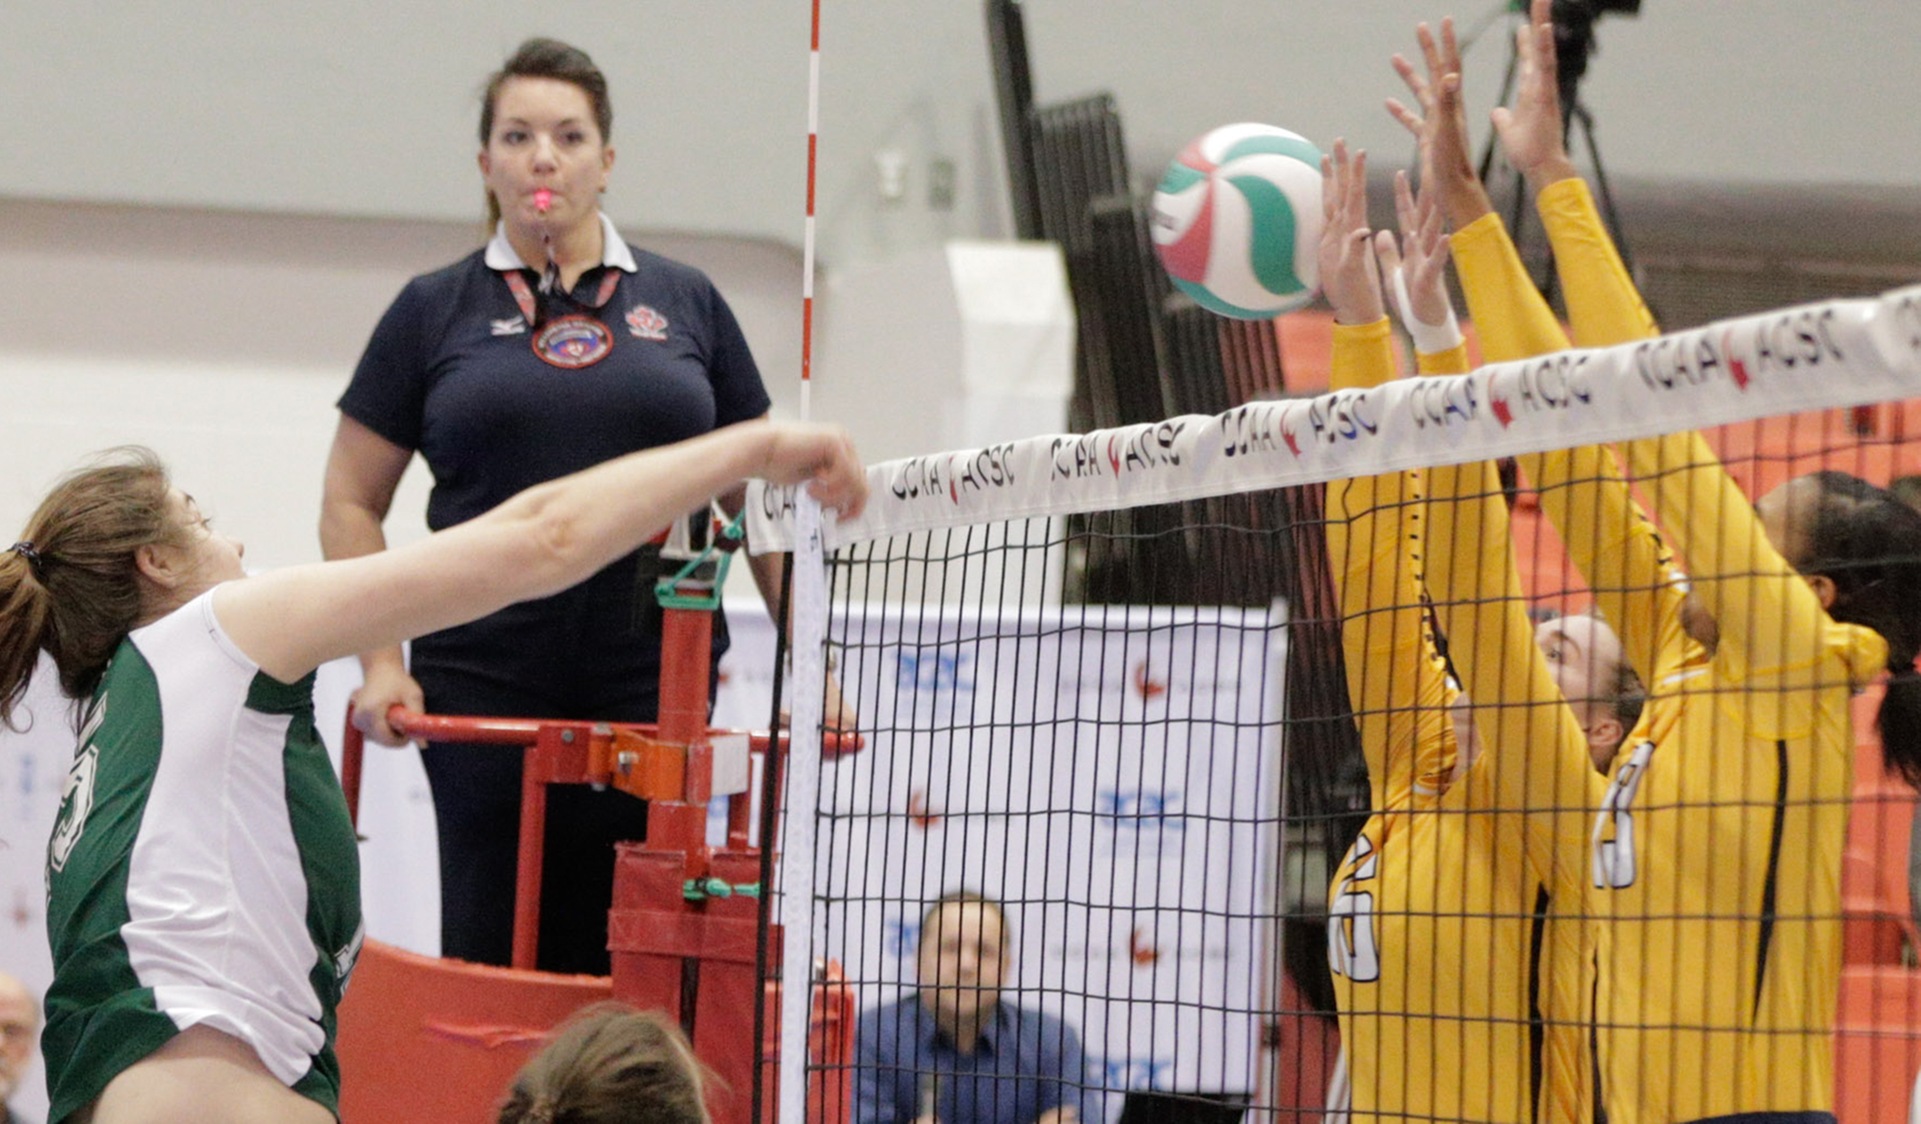 WOMEN’S VOLLEYBALL SET OUT FOR PRE-SEASON CHALLENGES IN QUEBEC